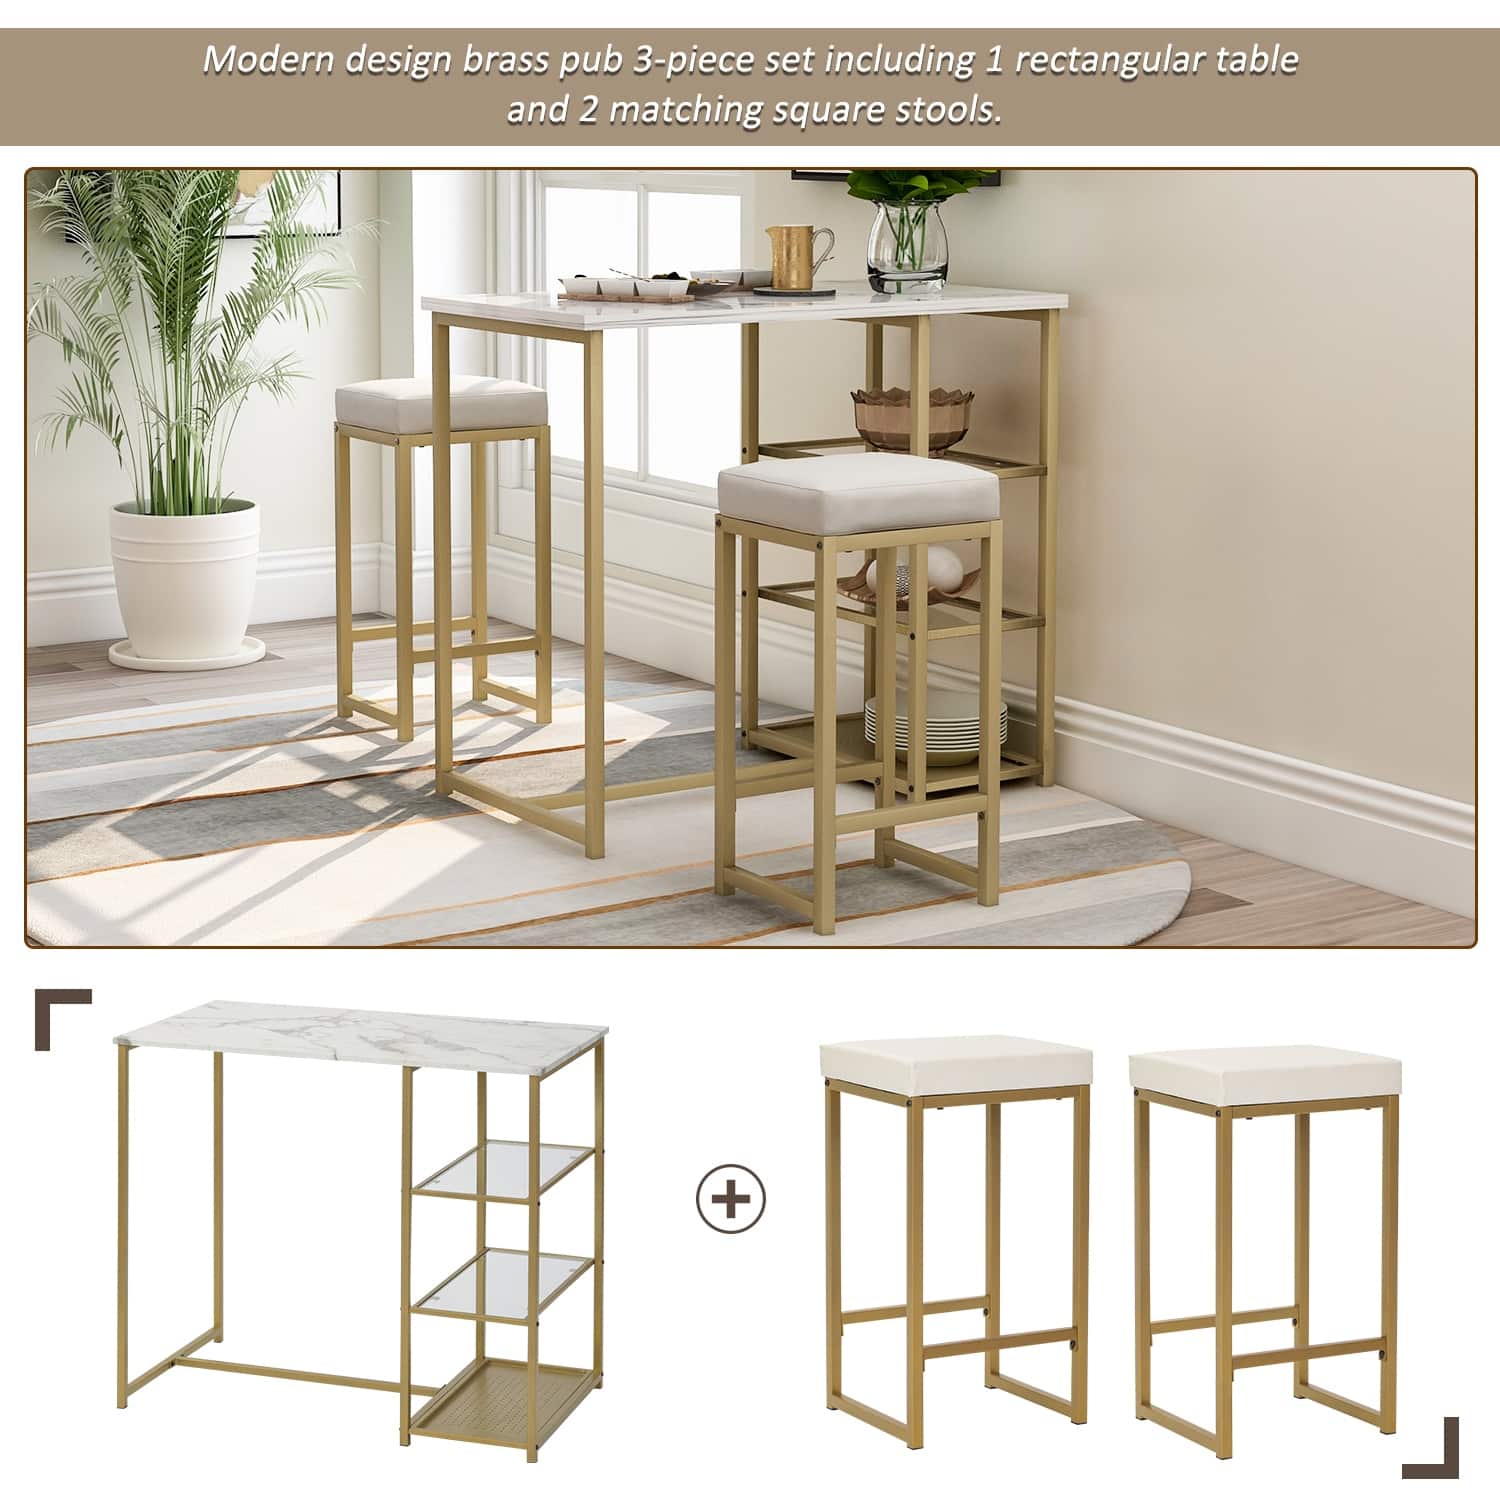 3-Piece Modern Design Brass Pub Set with Faux Marble Countertop & PU ...